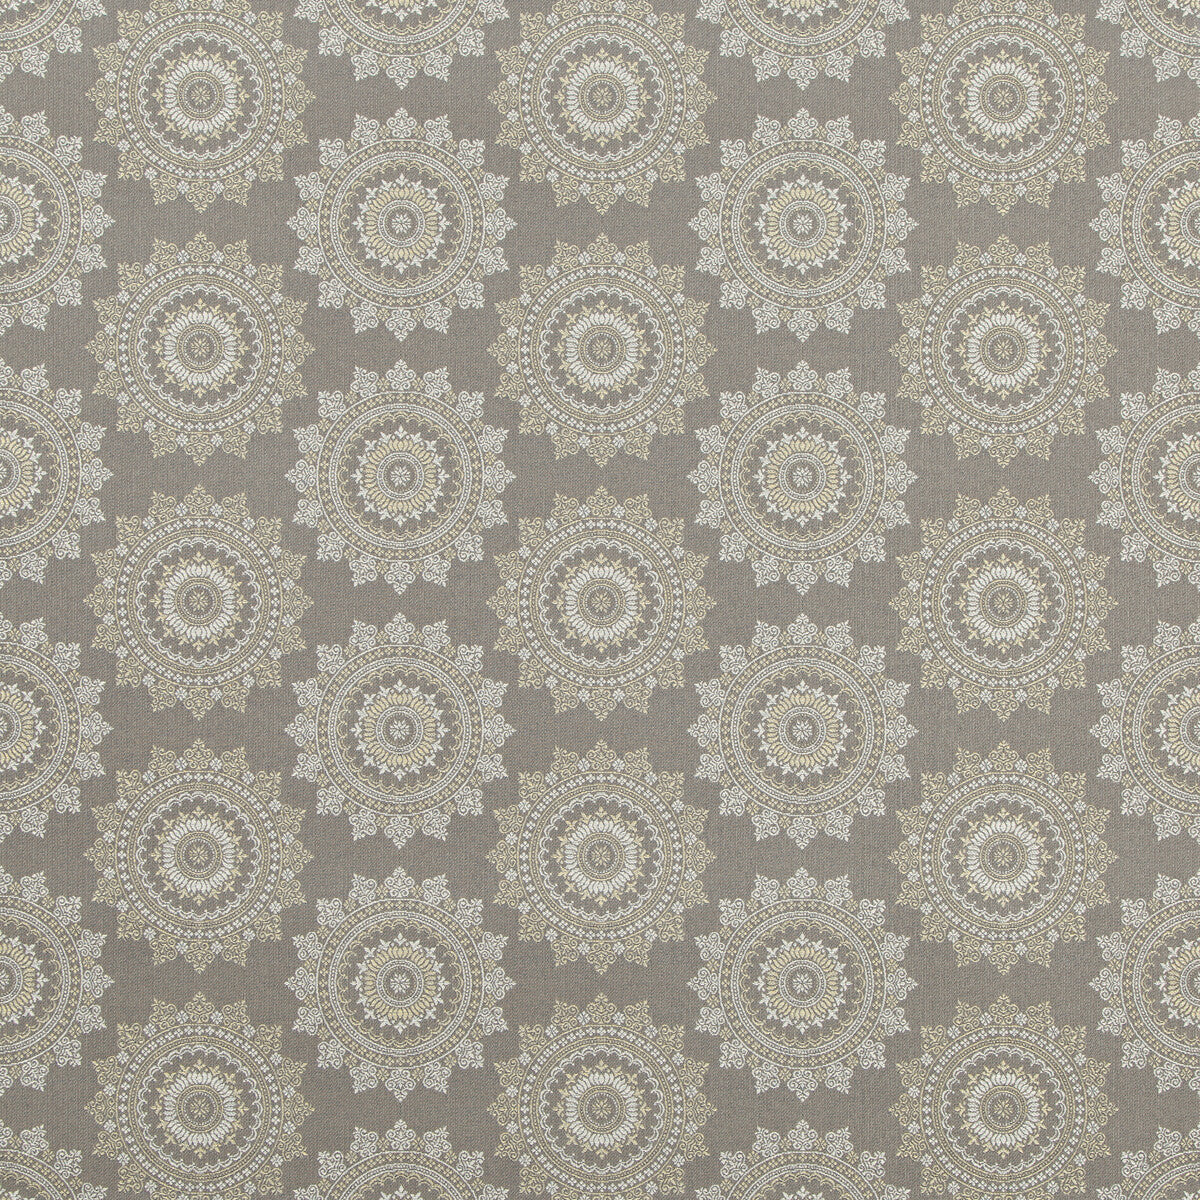 Piatto fabric in limestone color - pattern 35865.21.0 - by Kravet Contract in the Gis Crypton Green collection